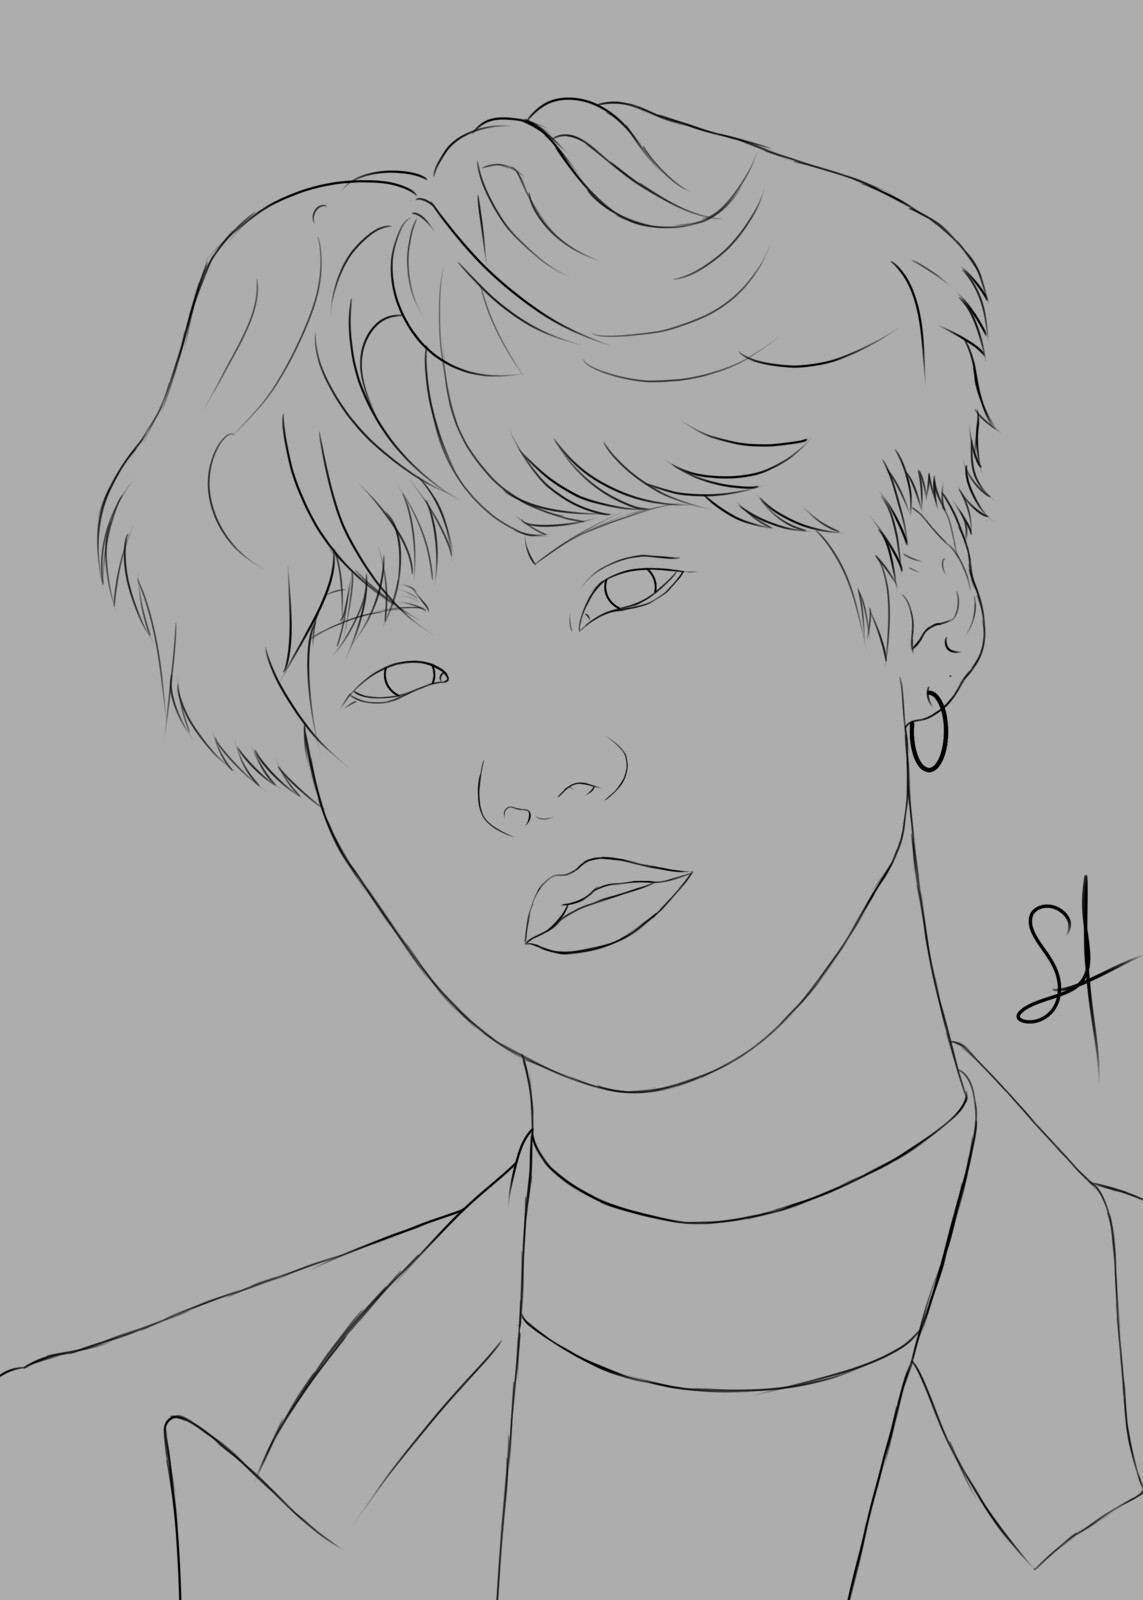 V Taehyung Bts Line Art Drawing Stock Vector (Royalty Free) 2307659797 |  Shutterstock